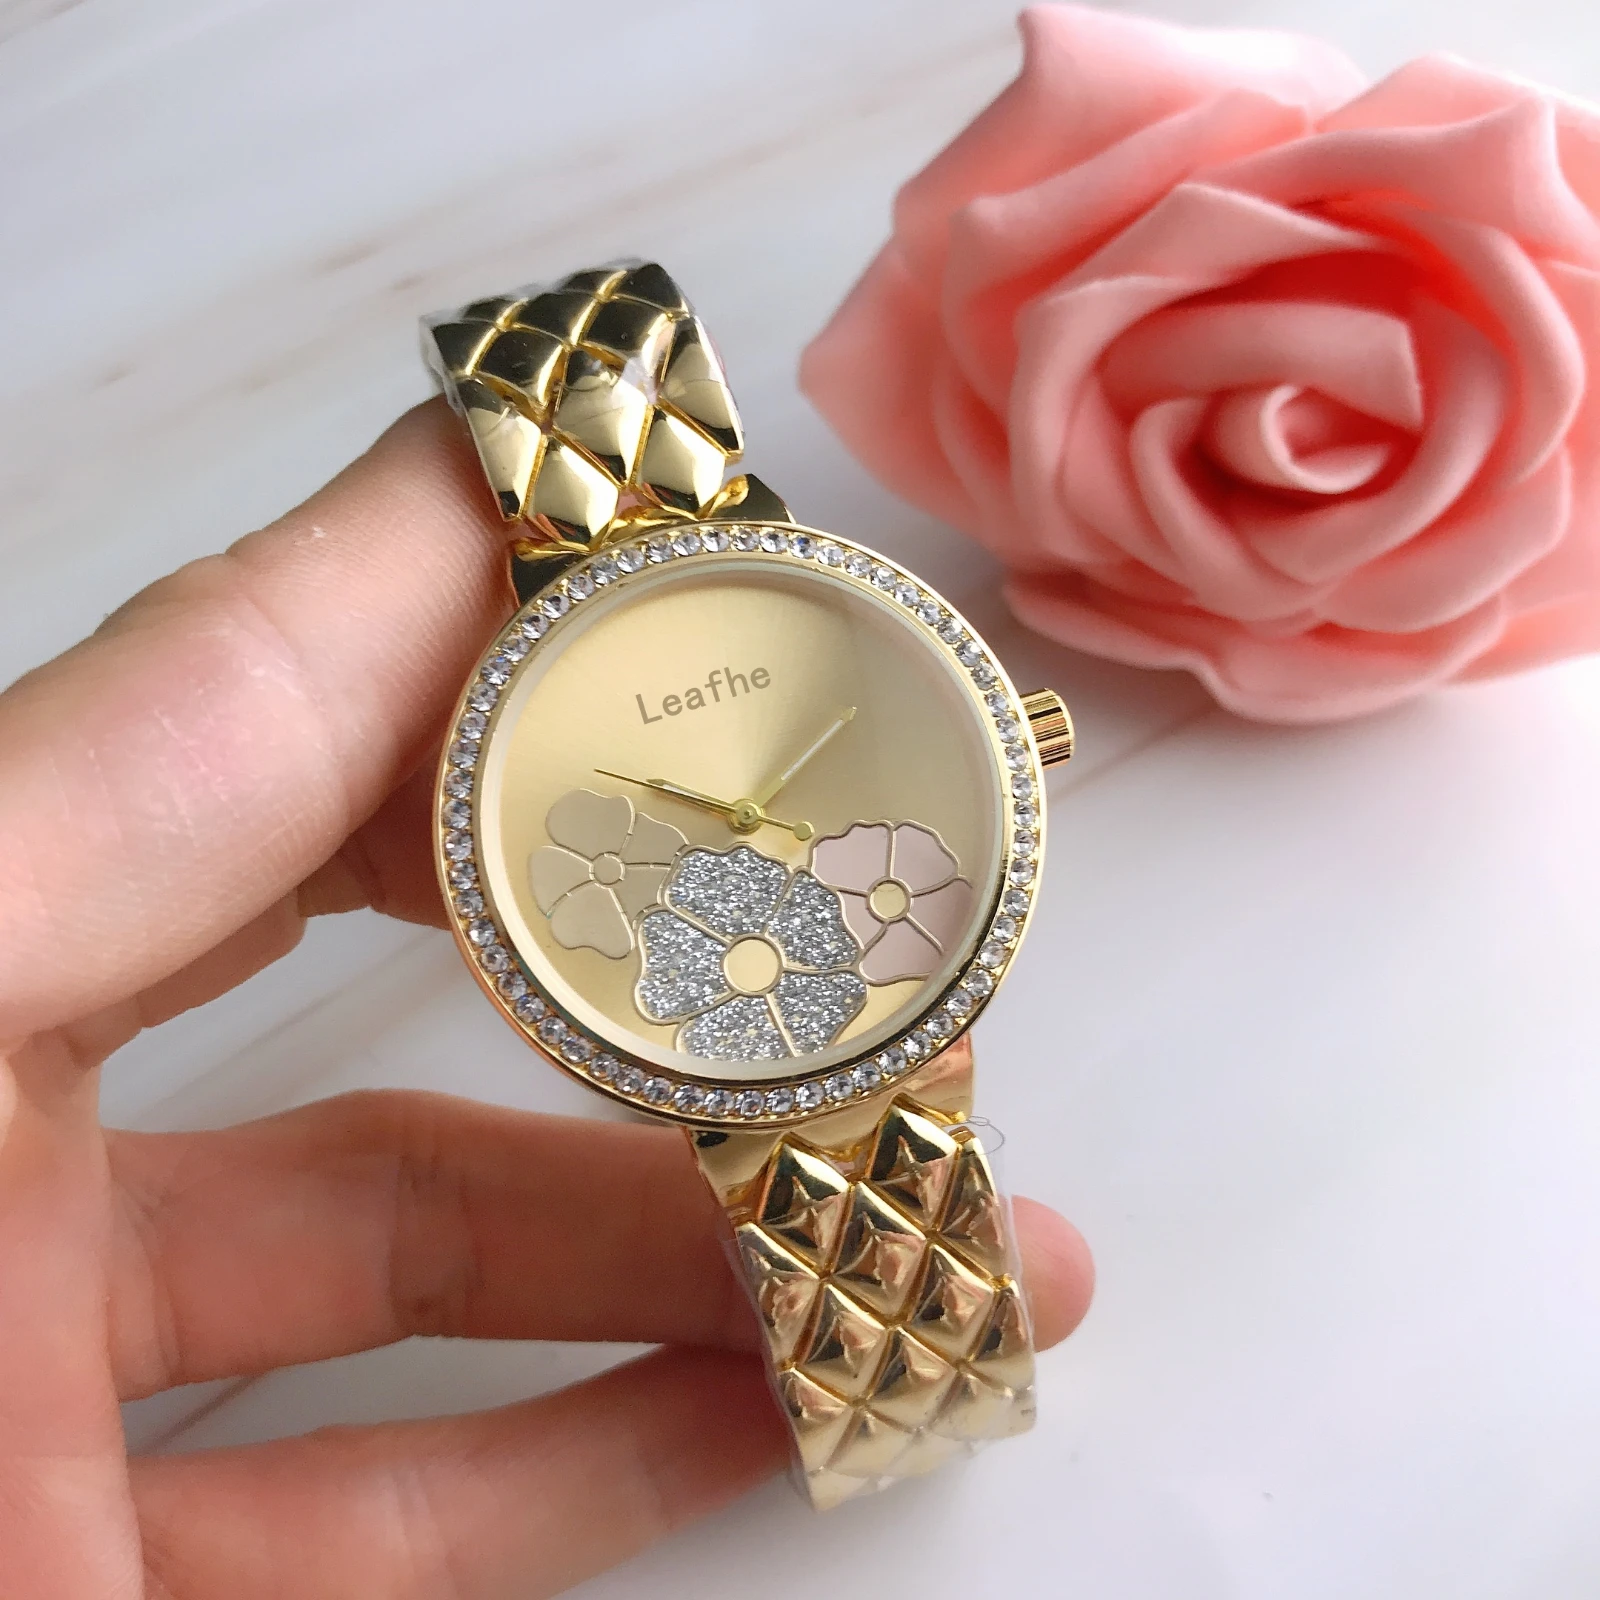 Fashion Brand Women Watches Silver Gold Rose Stainless Steel Flower Watch Ladies Quartz Watch Female Clock Reloj Mujer reloj mujer watches for women top brand women s watch leather rose gold dress female clock ladies simple fashion watch relogio